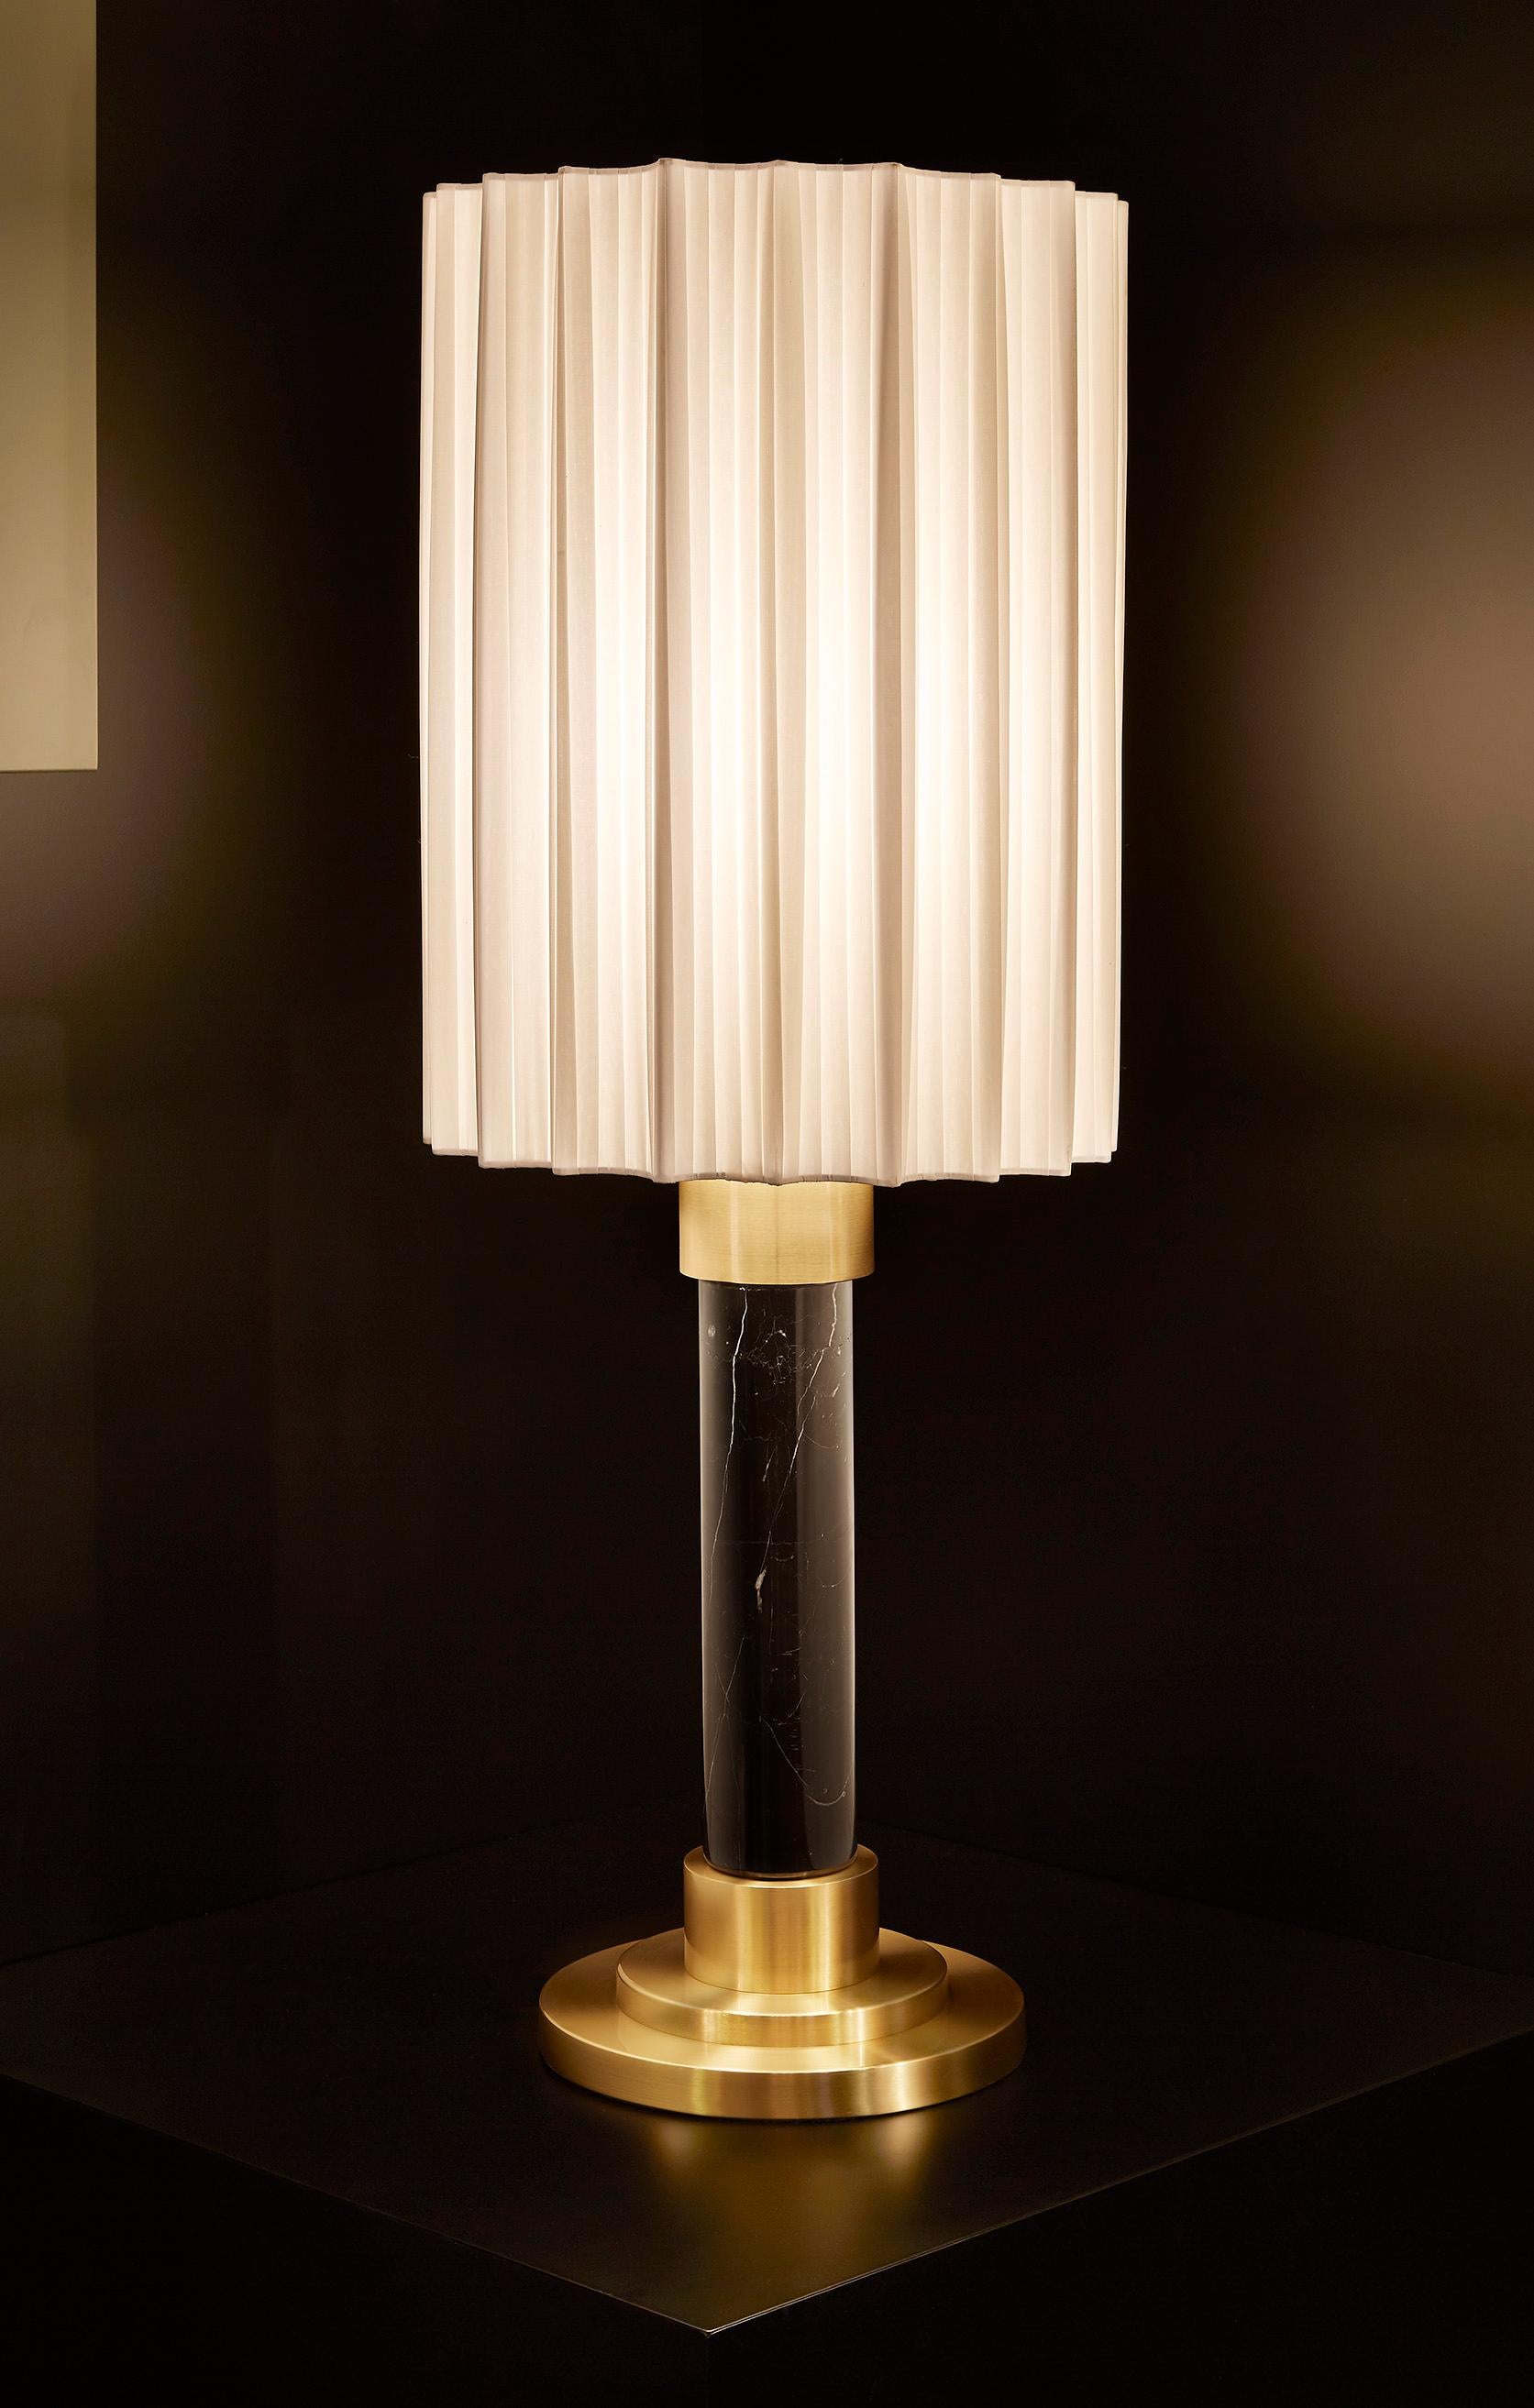 Black marble and brushed brass table lamp, with cotton fabric pleated shade.
Shade Dia: 300mm
Shade Height: 450mm
Overall Height: 880mm
Base Dia: 250mm
Height of Marble: 280mm

Made to order to buyer's specification. Variations to finishes